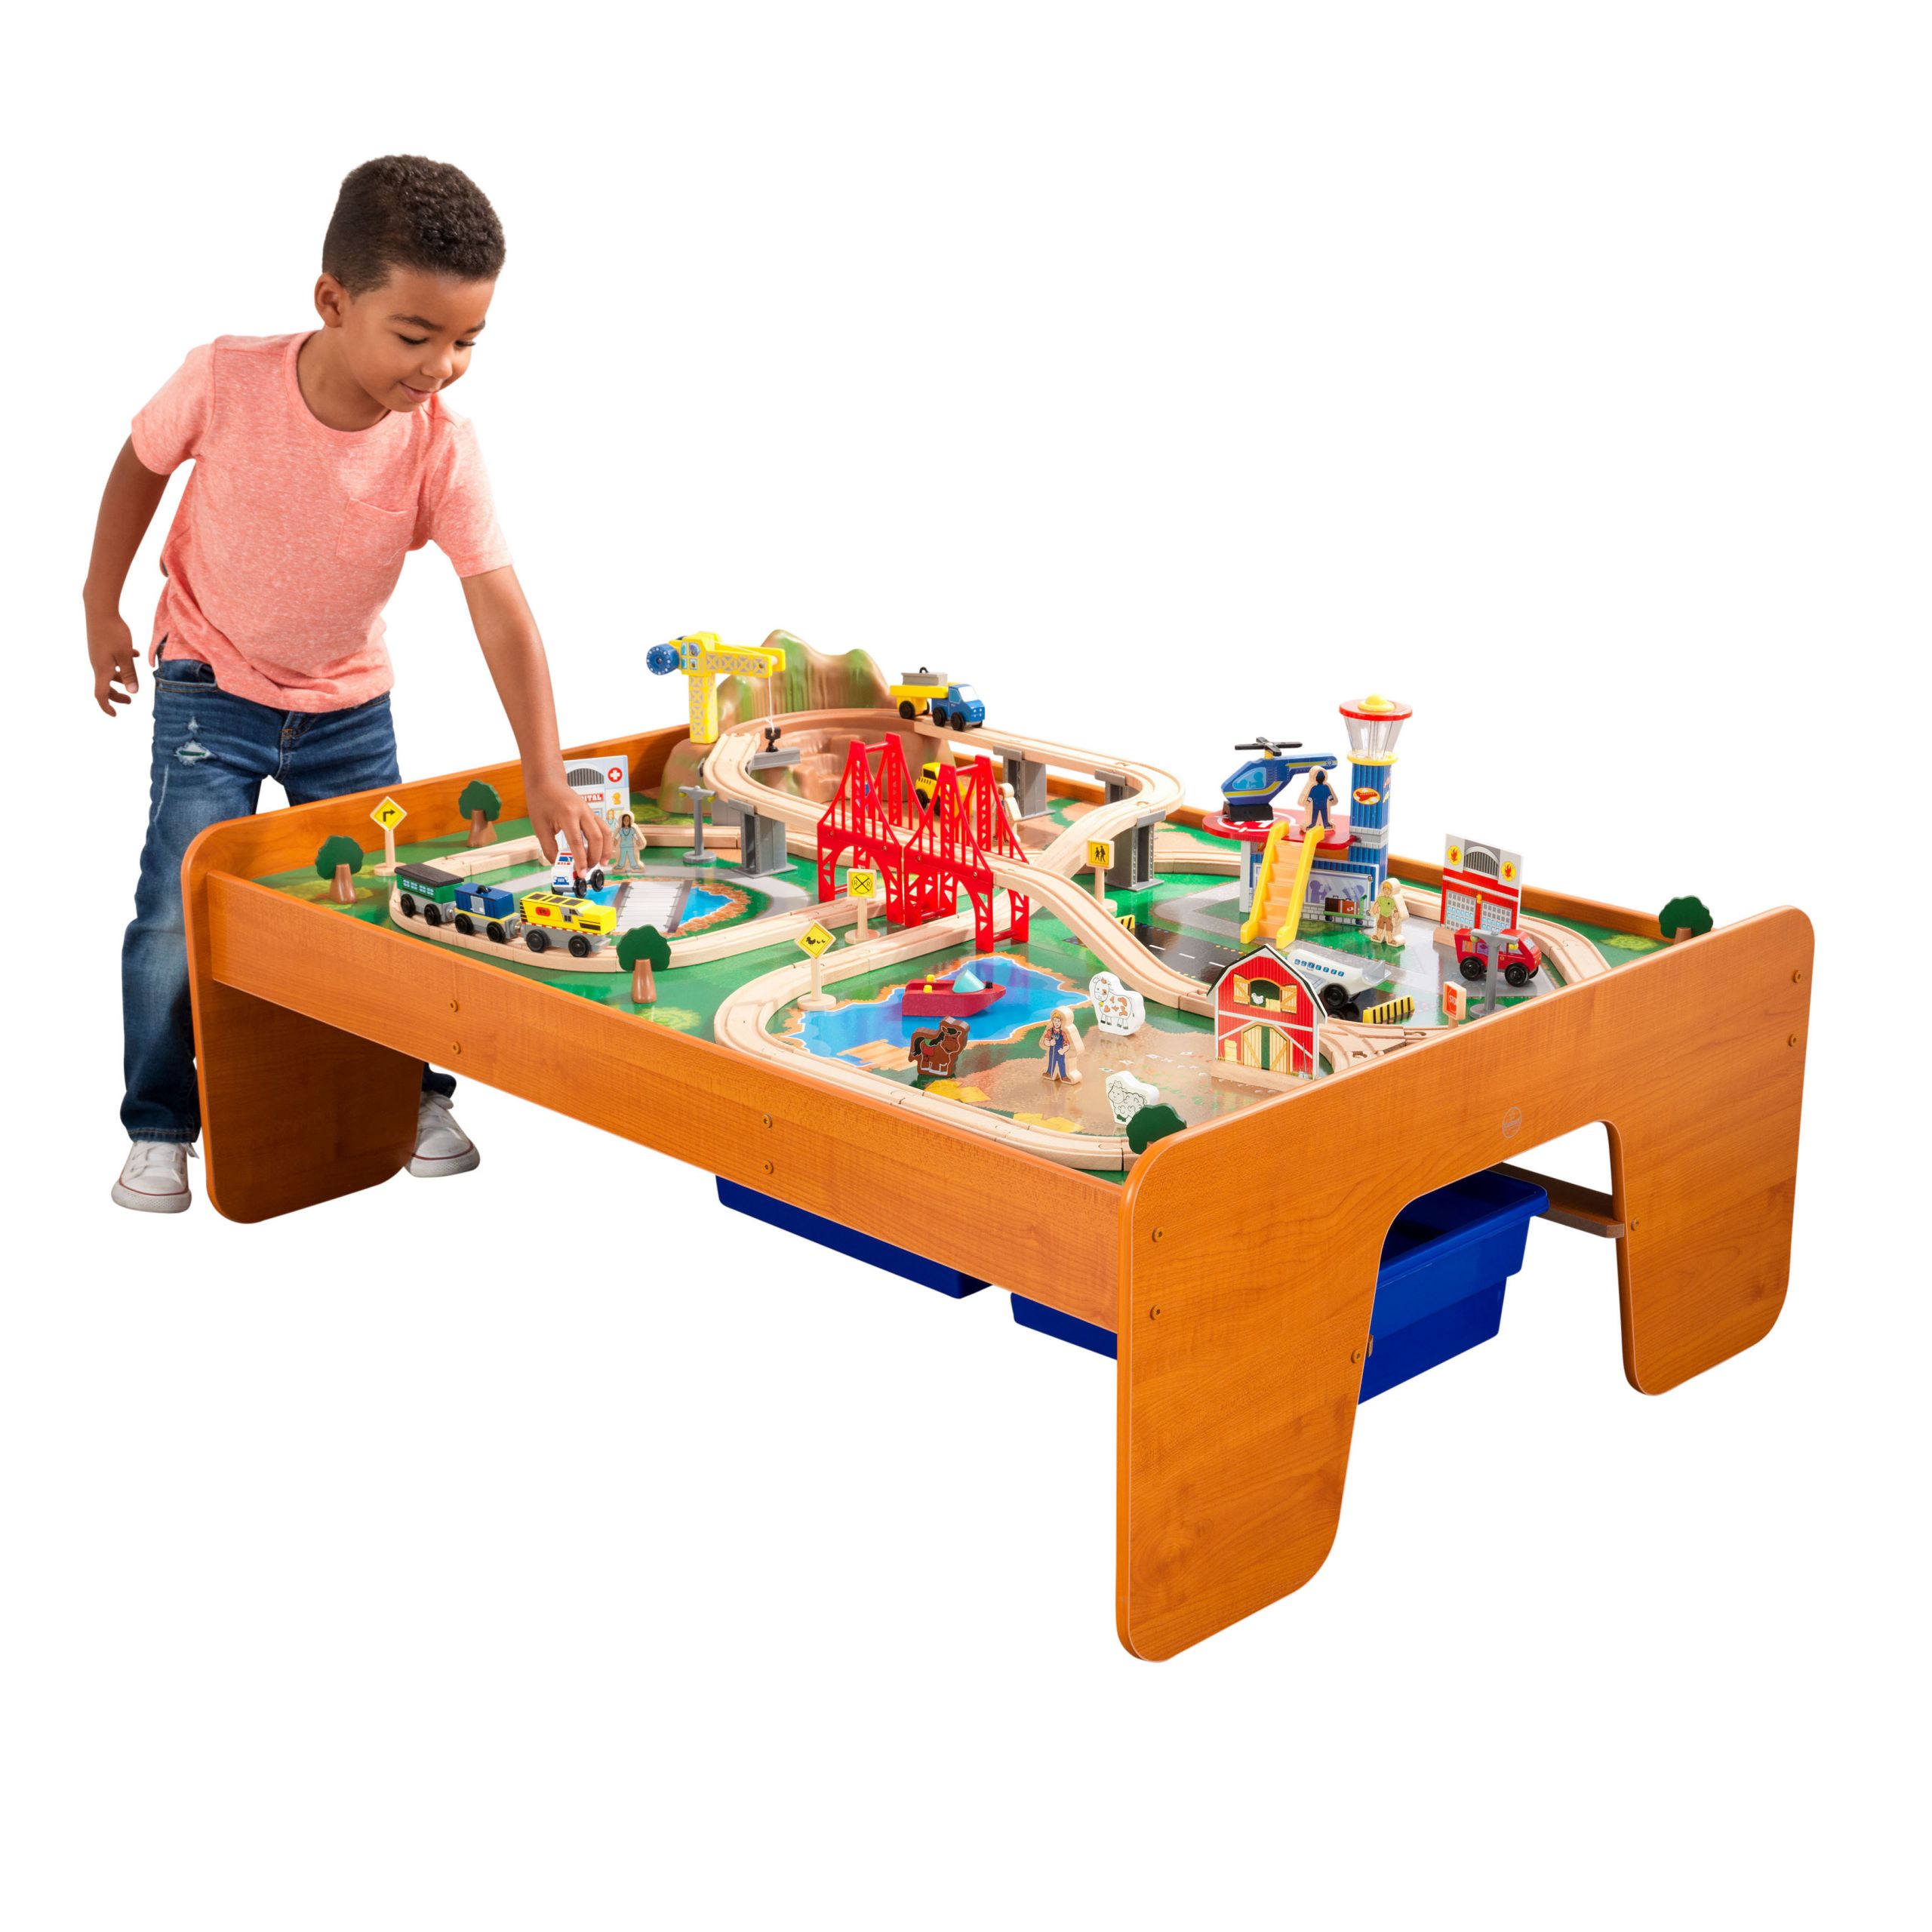 Kids Craft Train Table Set
 KidKraft Ride Around Town Wooden Train Set & Table with